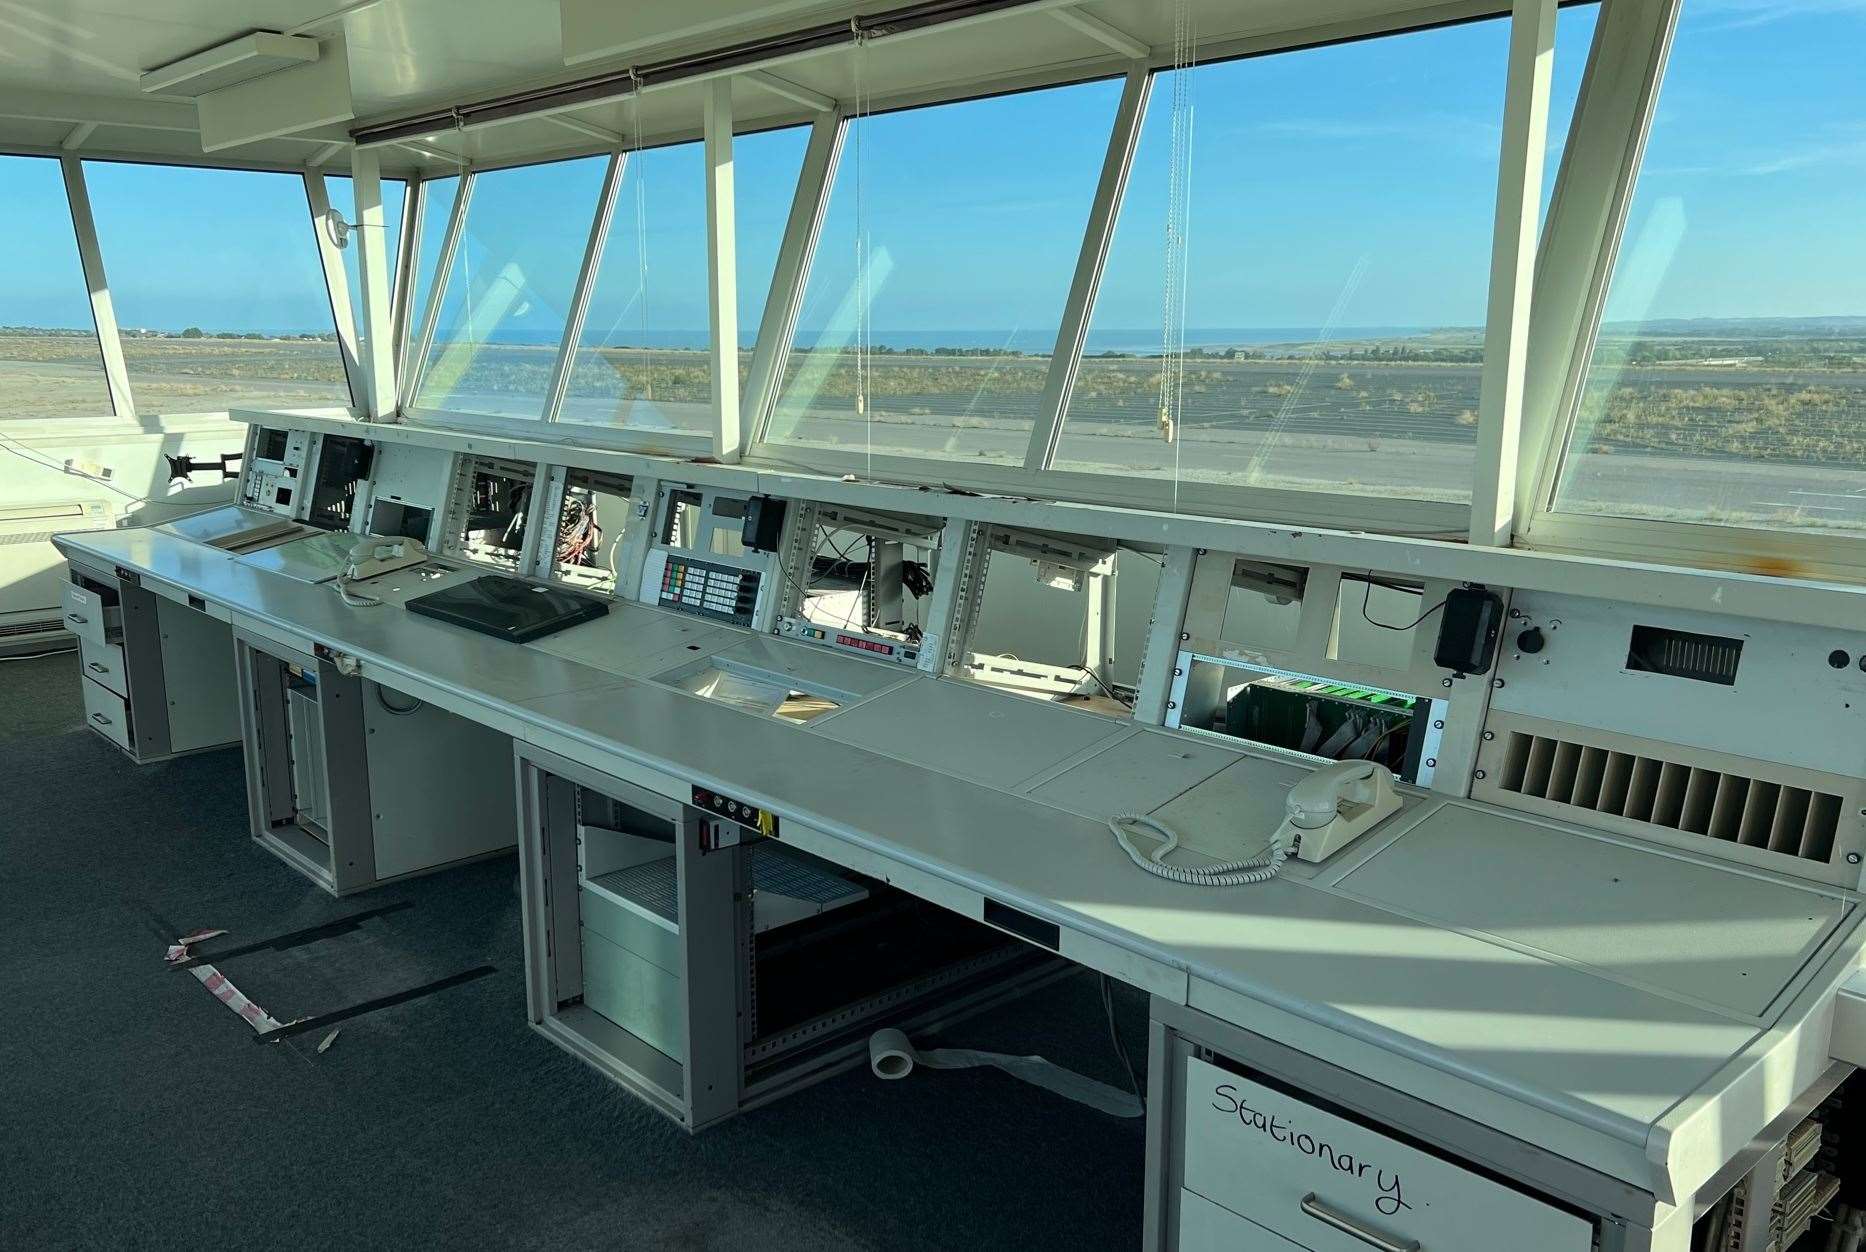 Inside the control tower